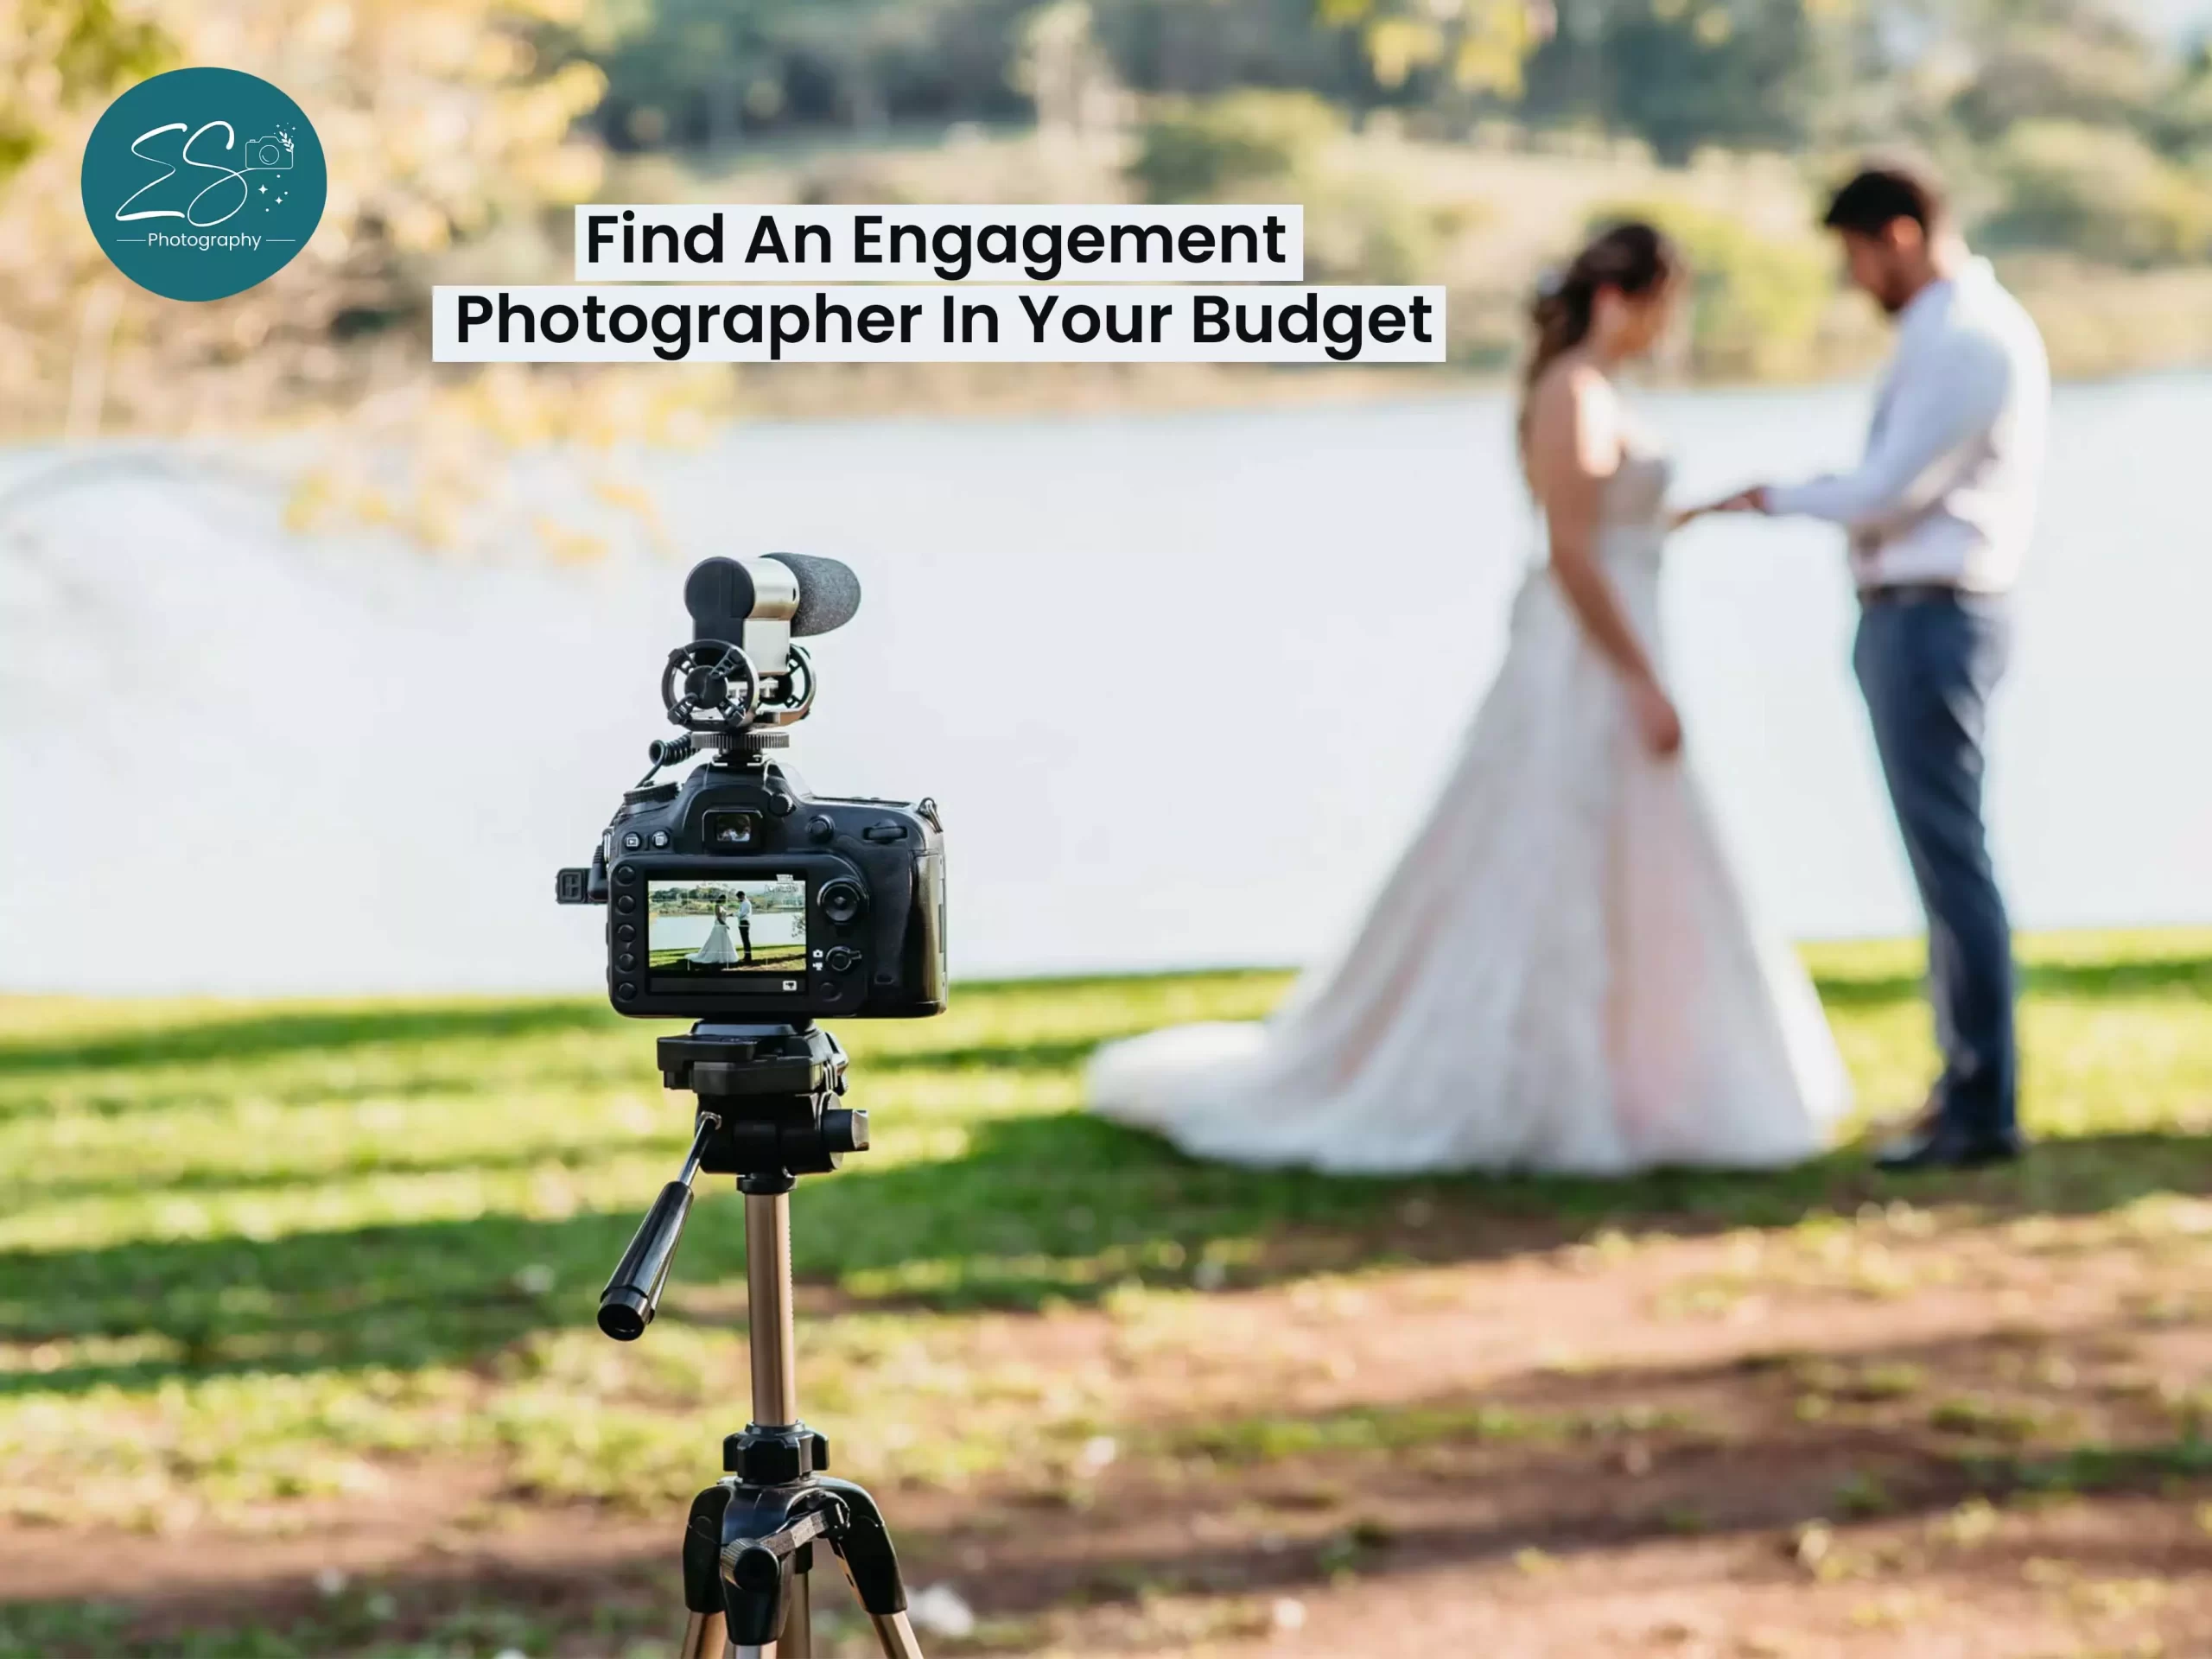 Find An Engagement Photographer In Your Budget